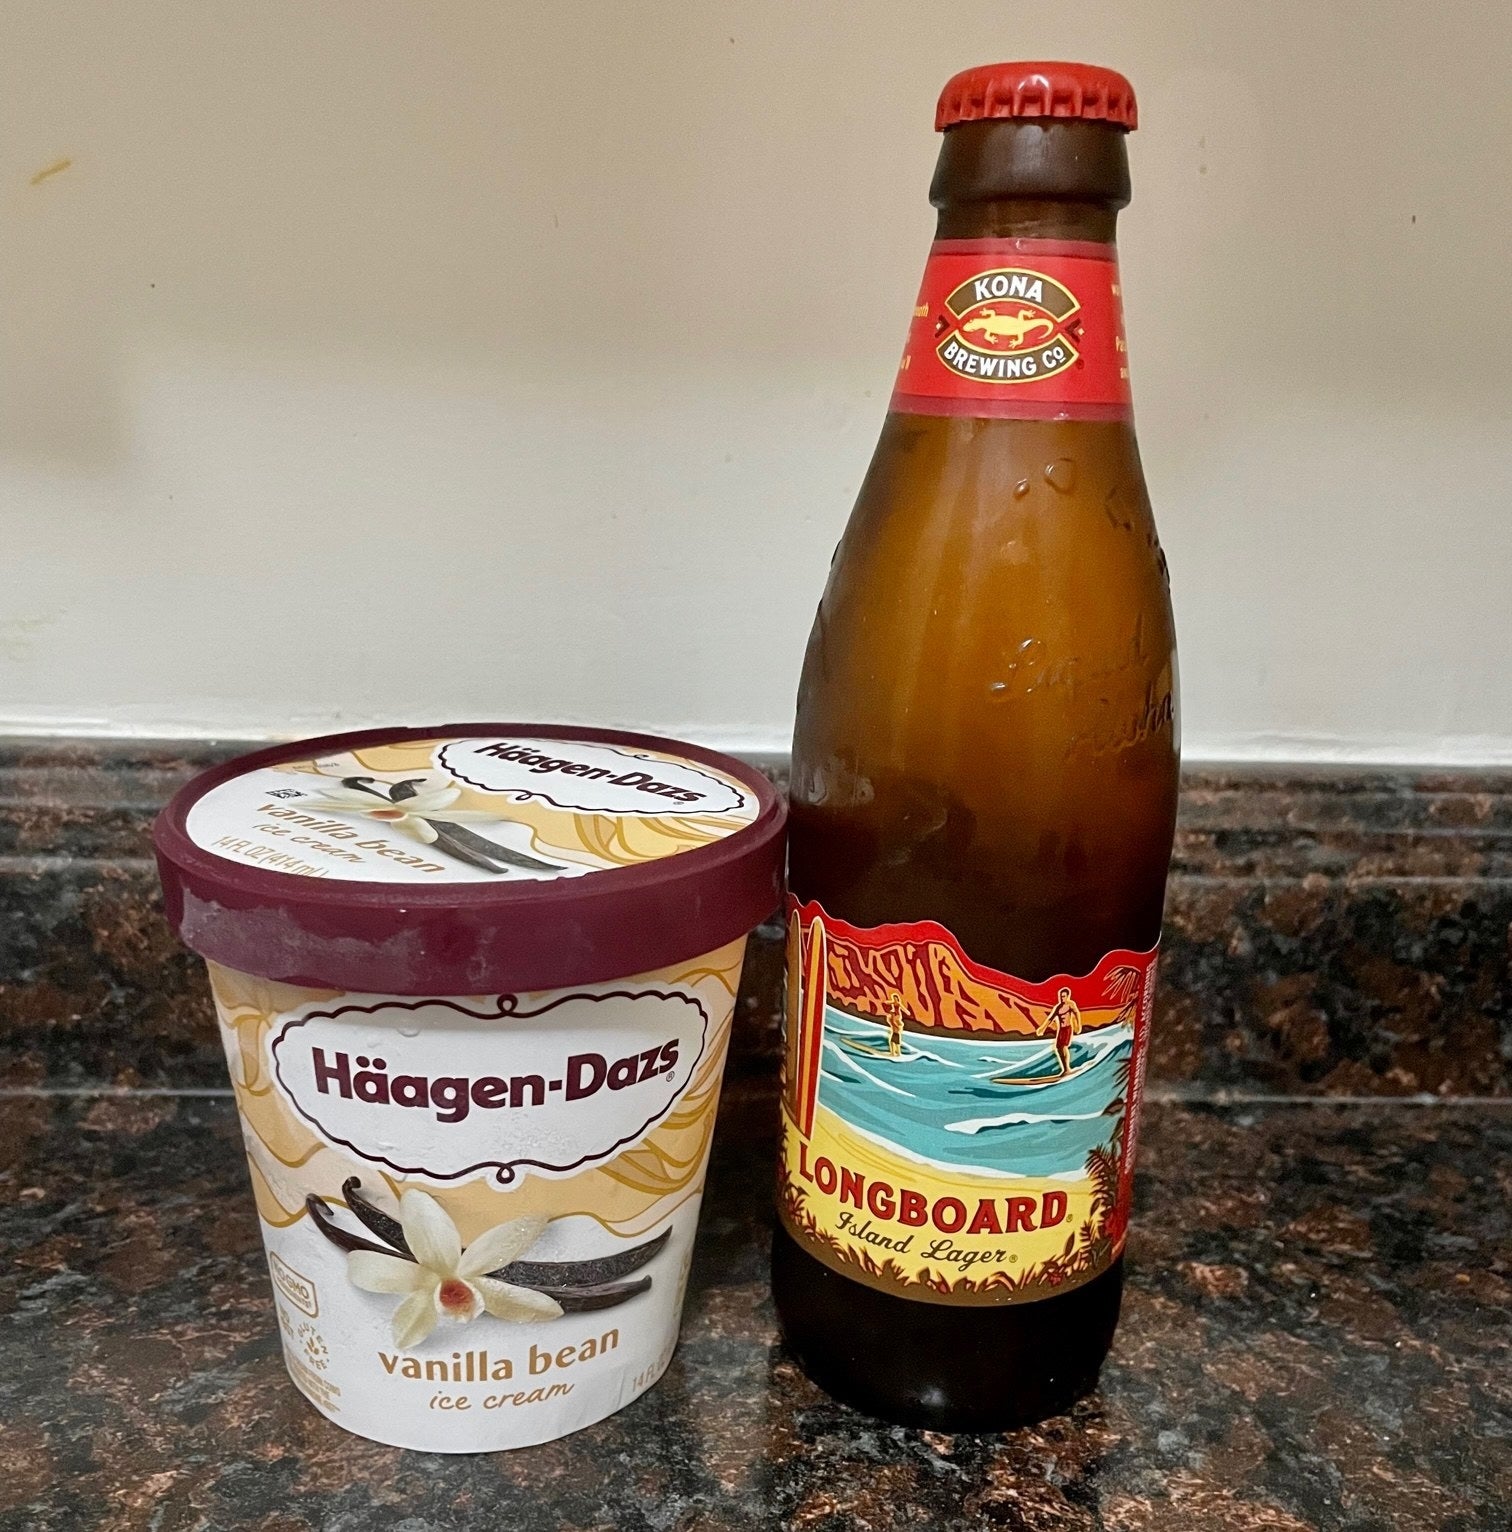 Ice cream and beer